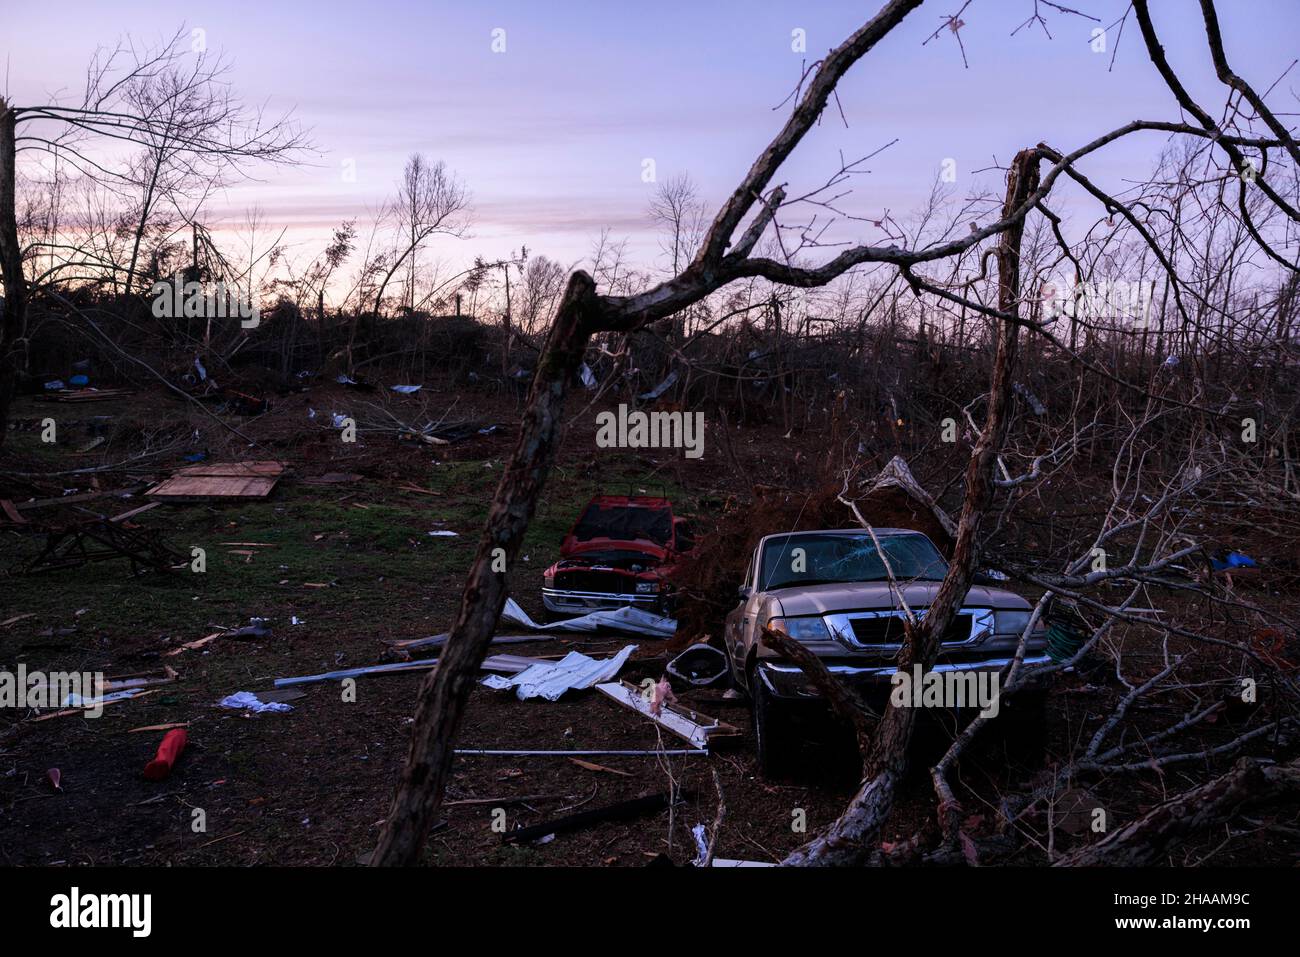 DAWSON SPRINGS, KENTUCKY, UNITED STATES - 2021/12/11: Houses and other structures are destroyed after a tornado tore through rural Kentucky on December 11, 2021 in Dawson Springs, Ky. The tornado touched down around 10 p.m. Friday night, and left a path of destruction for over 200 miles in Kentucky. The tornado began in Arkansas. (Photo by Jeremy Hogan/The Bloomingtonian) Stock Photo